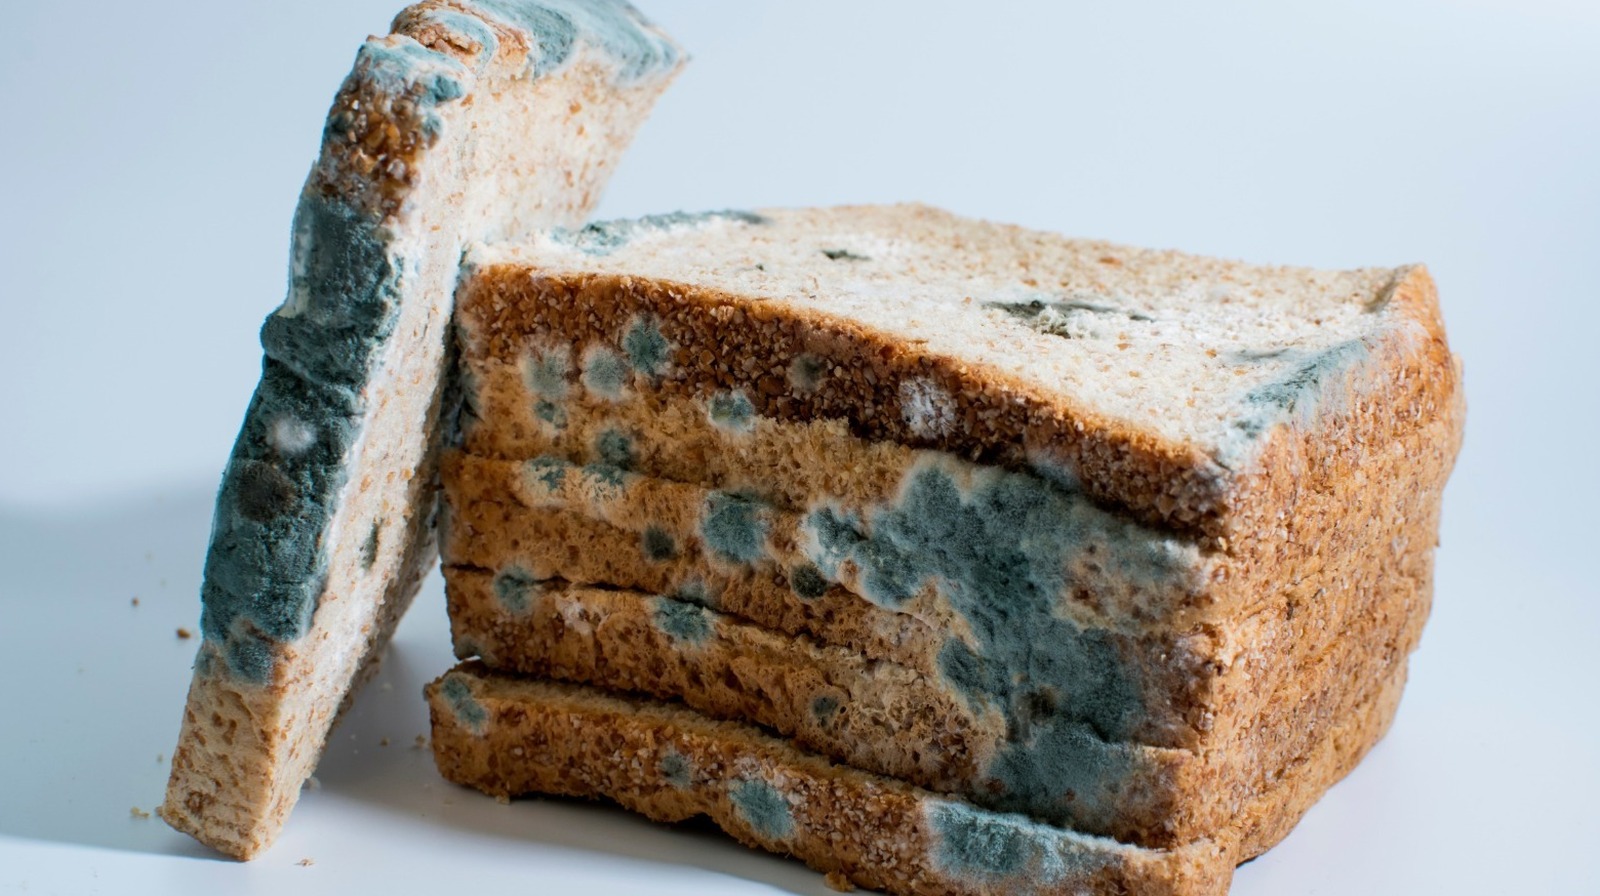 Why You Shouldn't Just Cut The Mold Off Old Bread